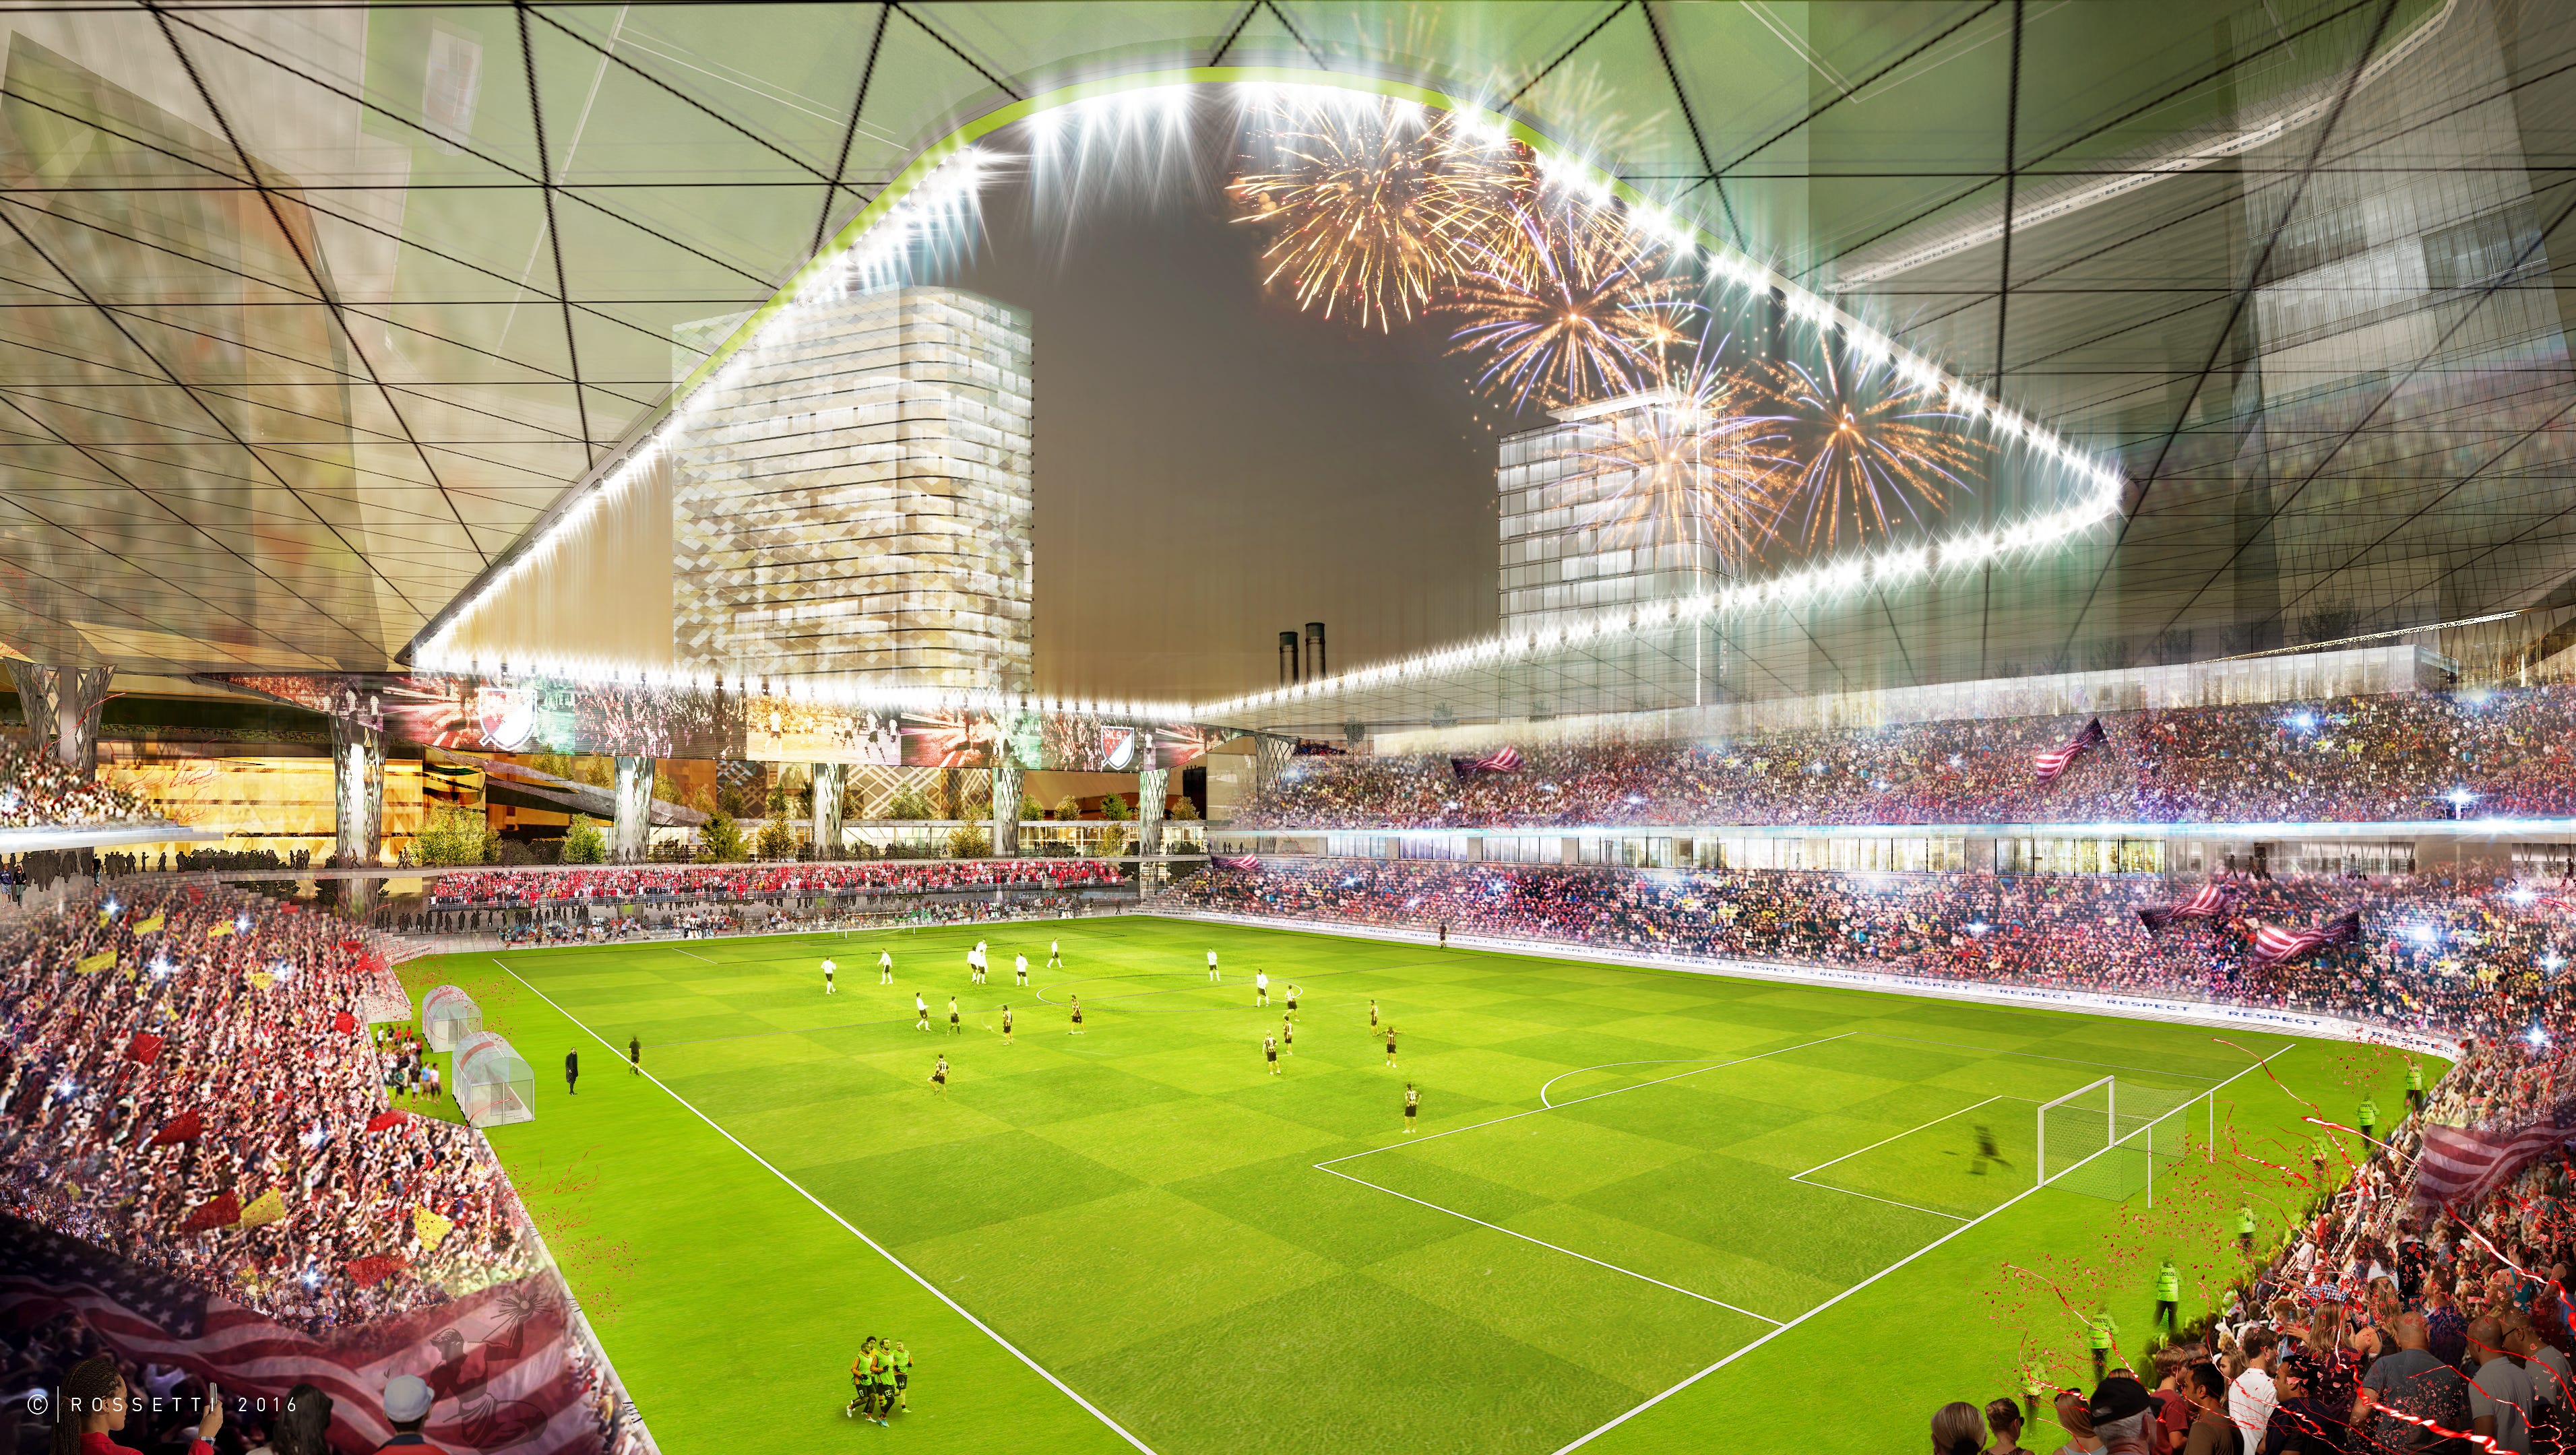 1b Investment In Detroit To Include Major League Soccer